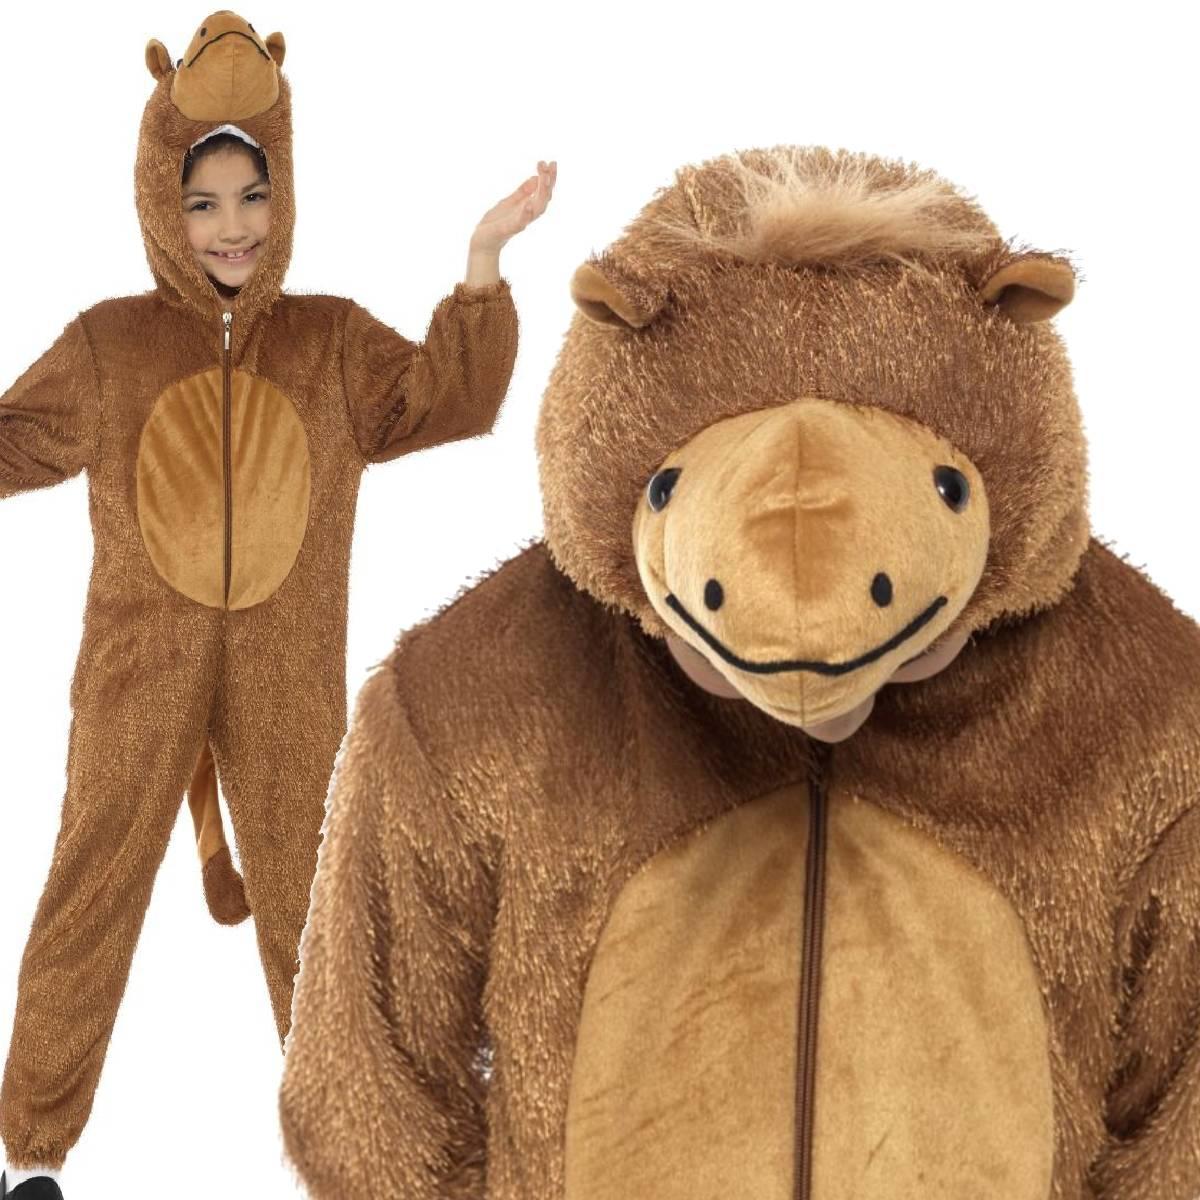 Kid's Camel fancy dress costume for circus or nativity productions available here at Karnival Costumes online party shop